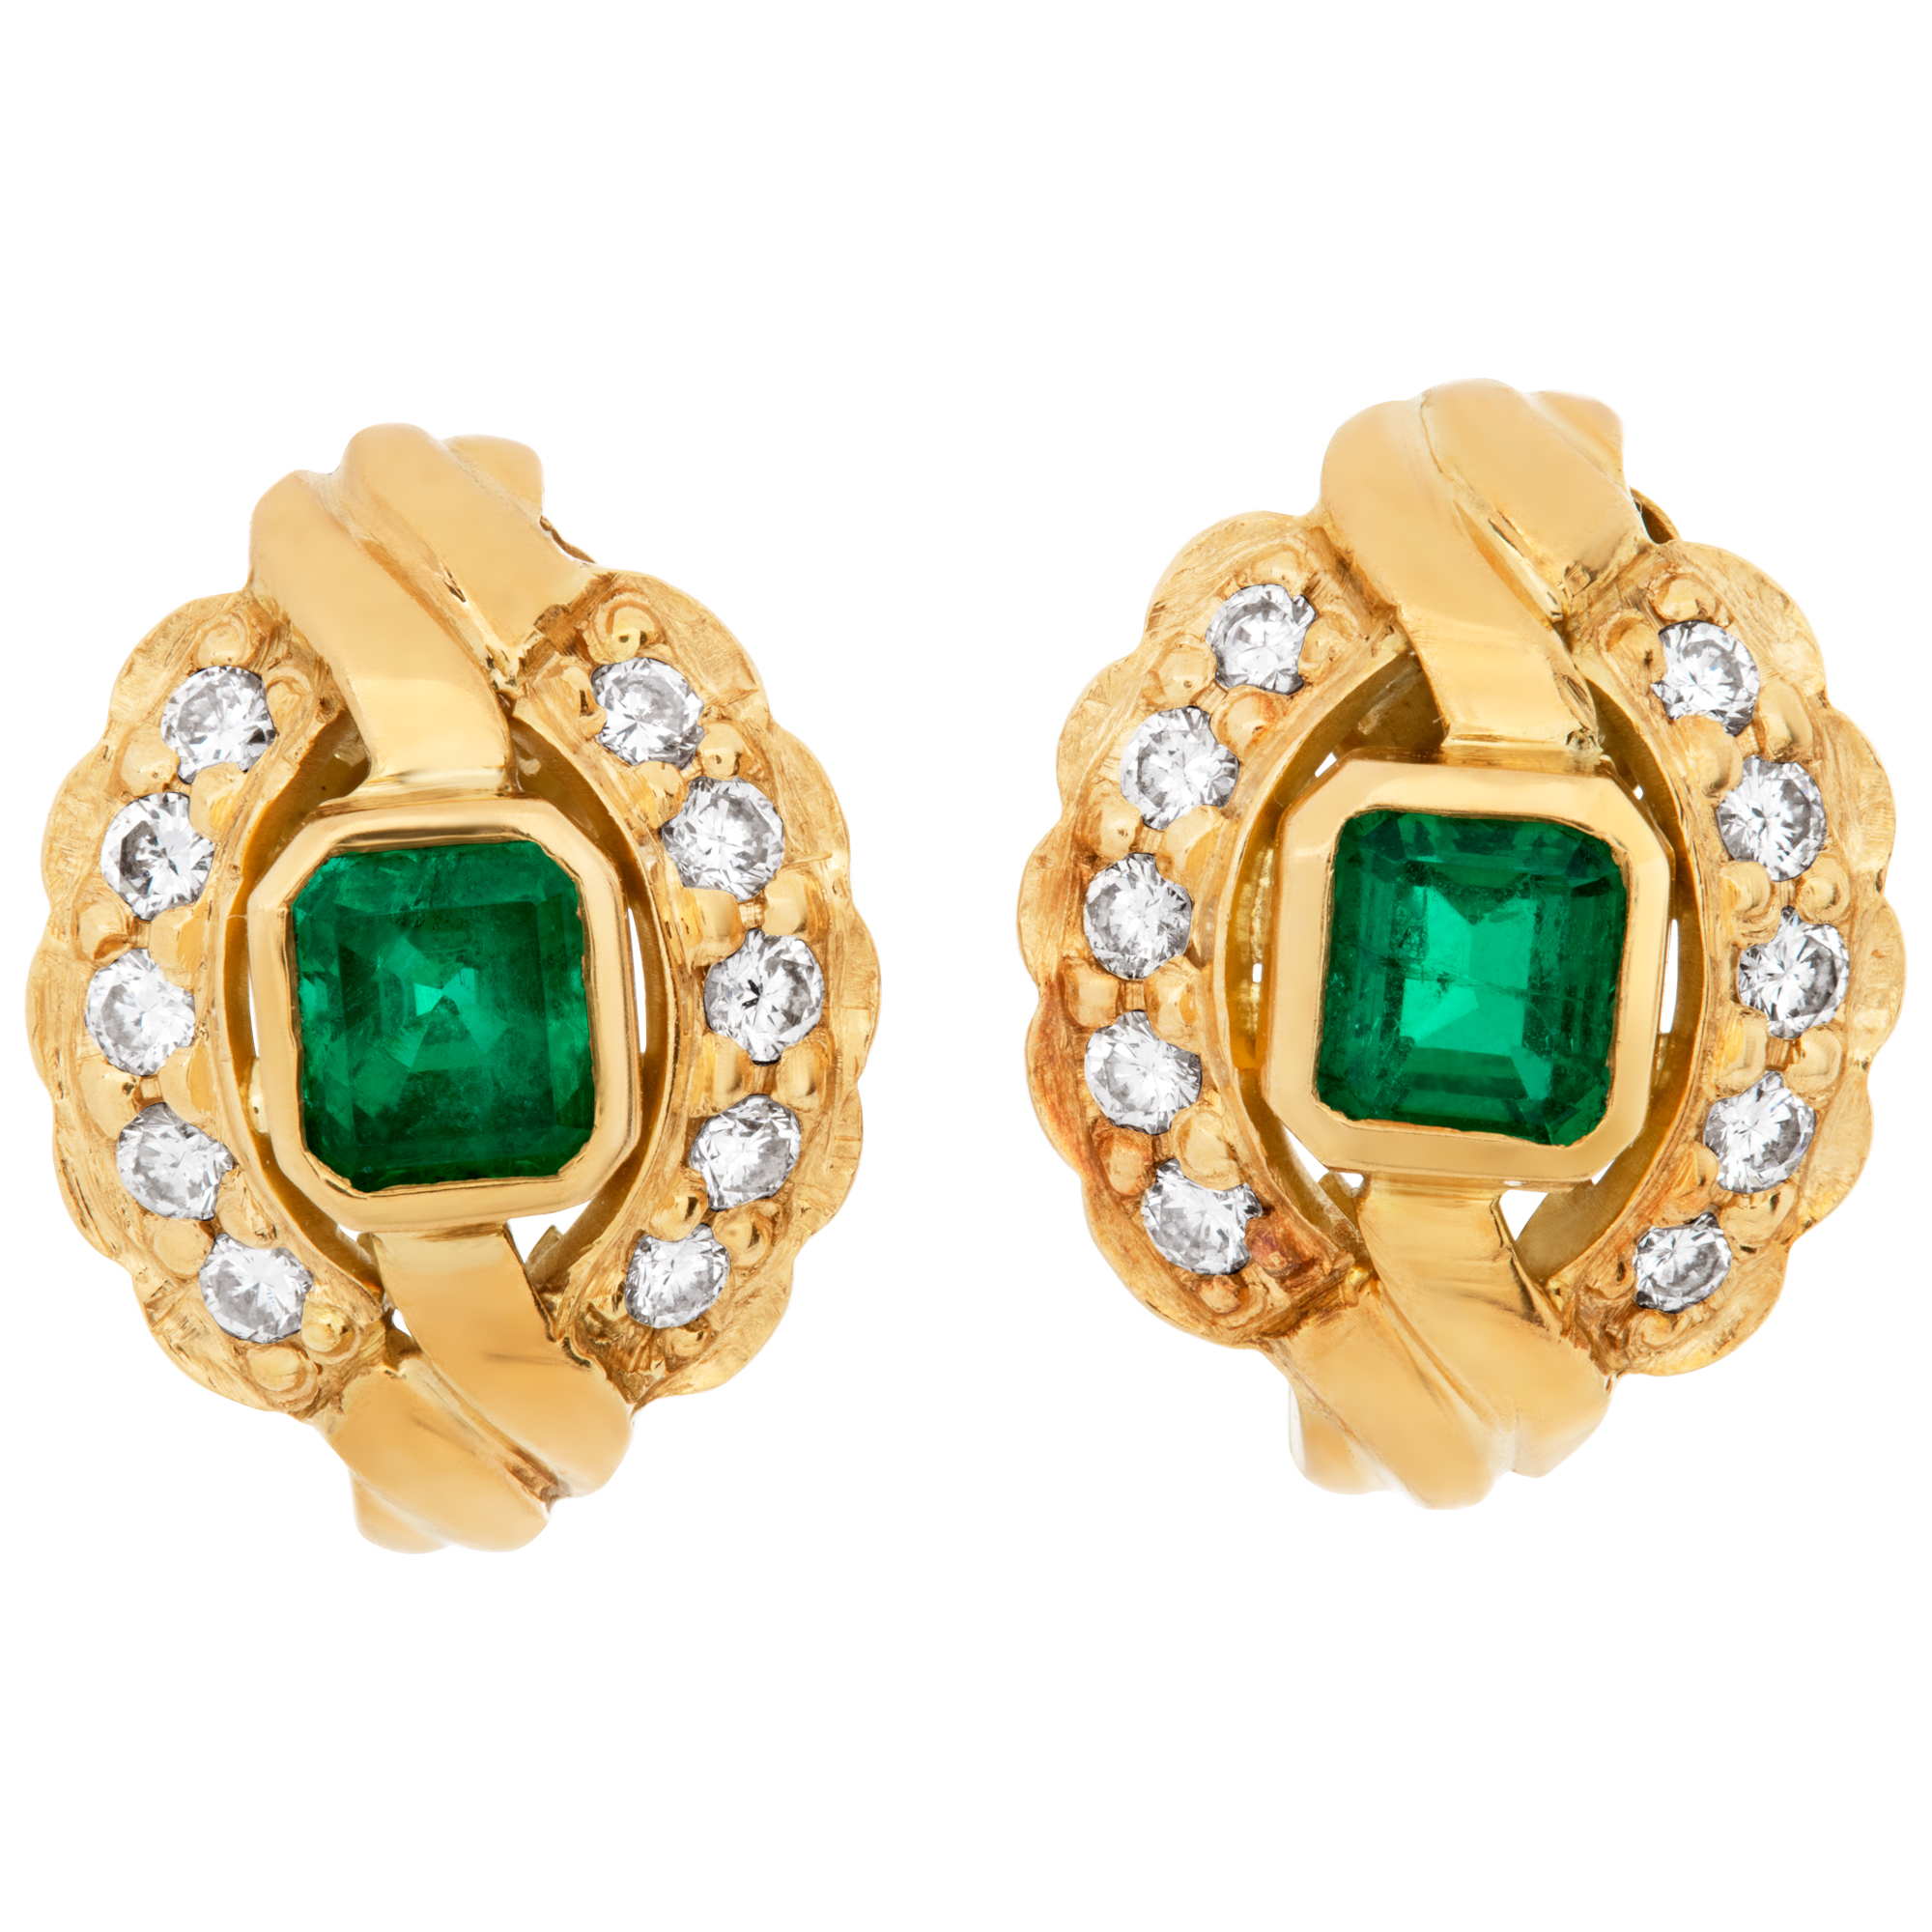 Emerald Earrings Set In 18k Yellow Gold With Diamond Accents